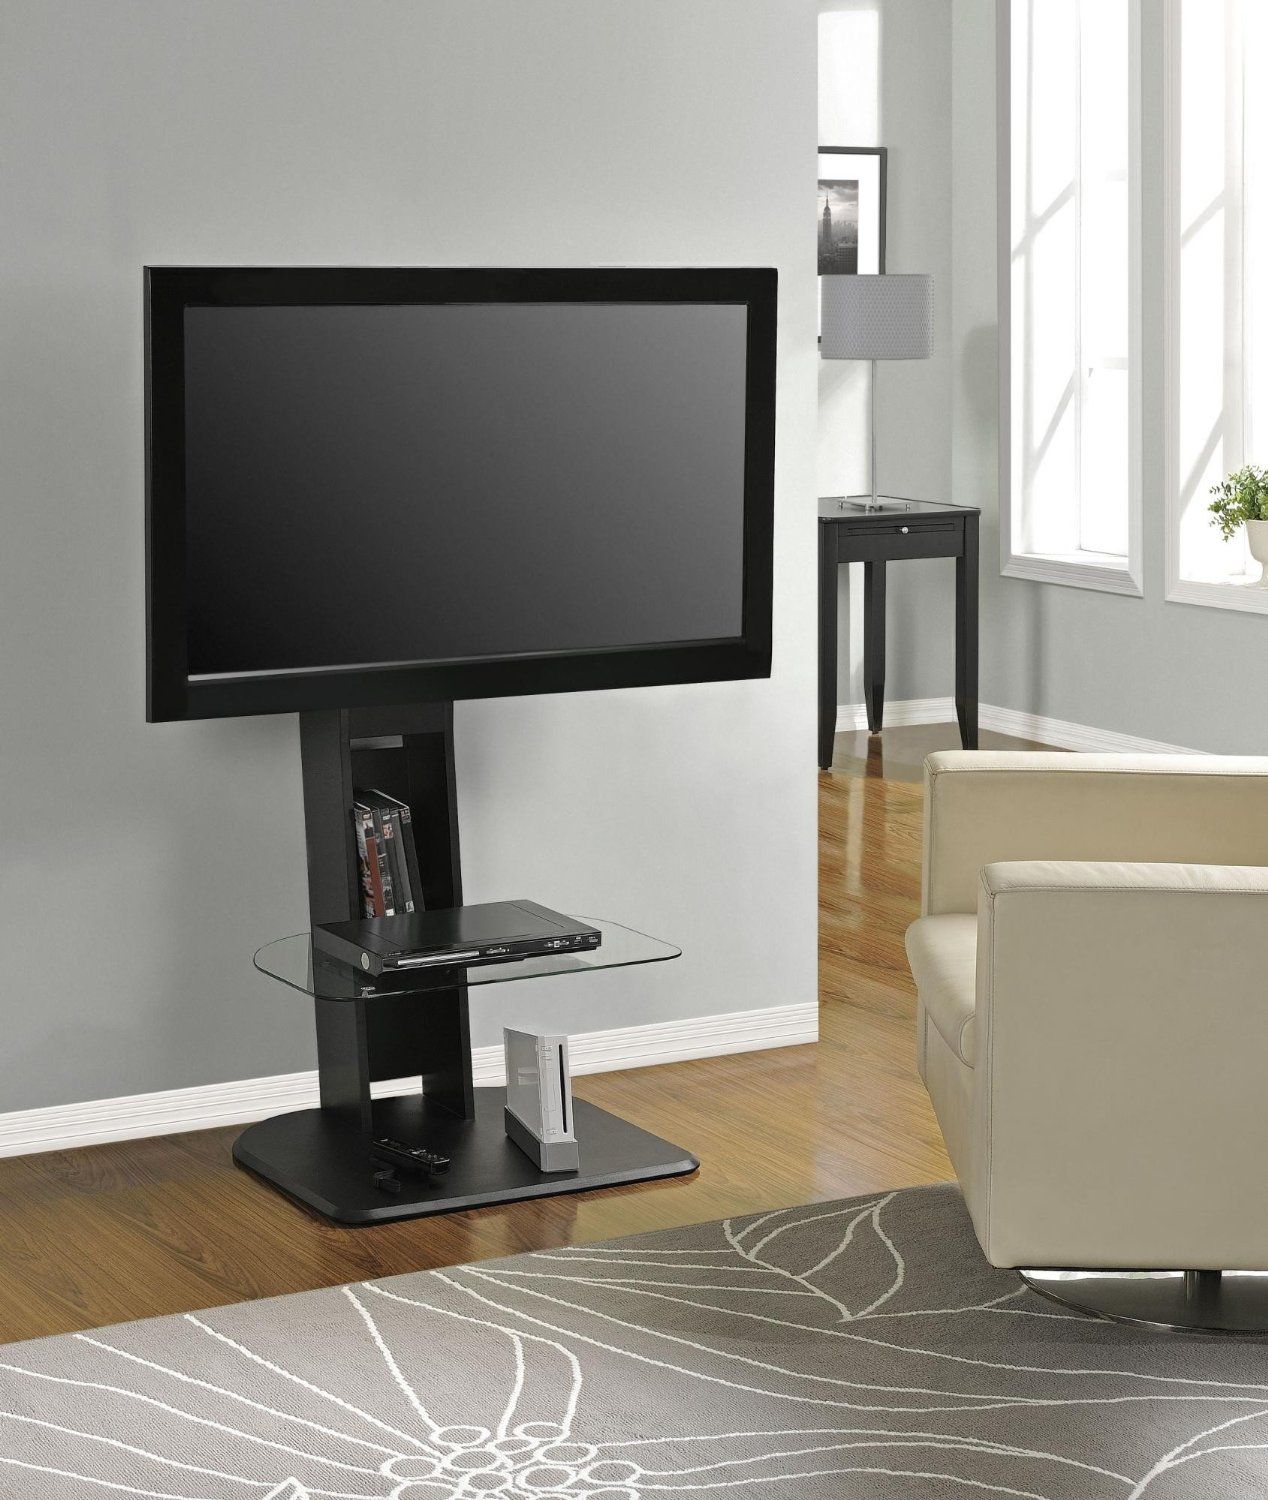 Cool Flat Screen Tv Stands With Mount – Homesfeed Throughout Corner Tv Cabinets For Flat Screen (View 1 of 15)